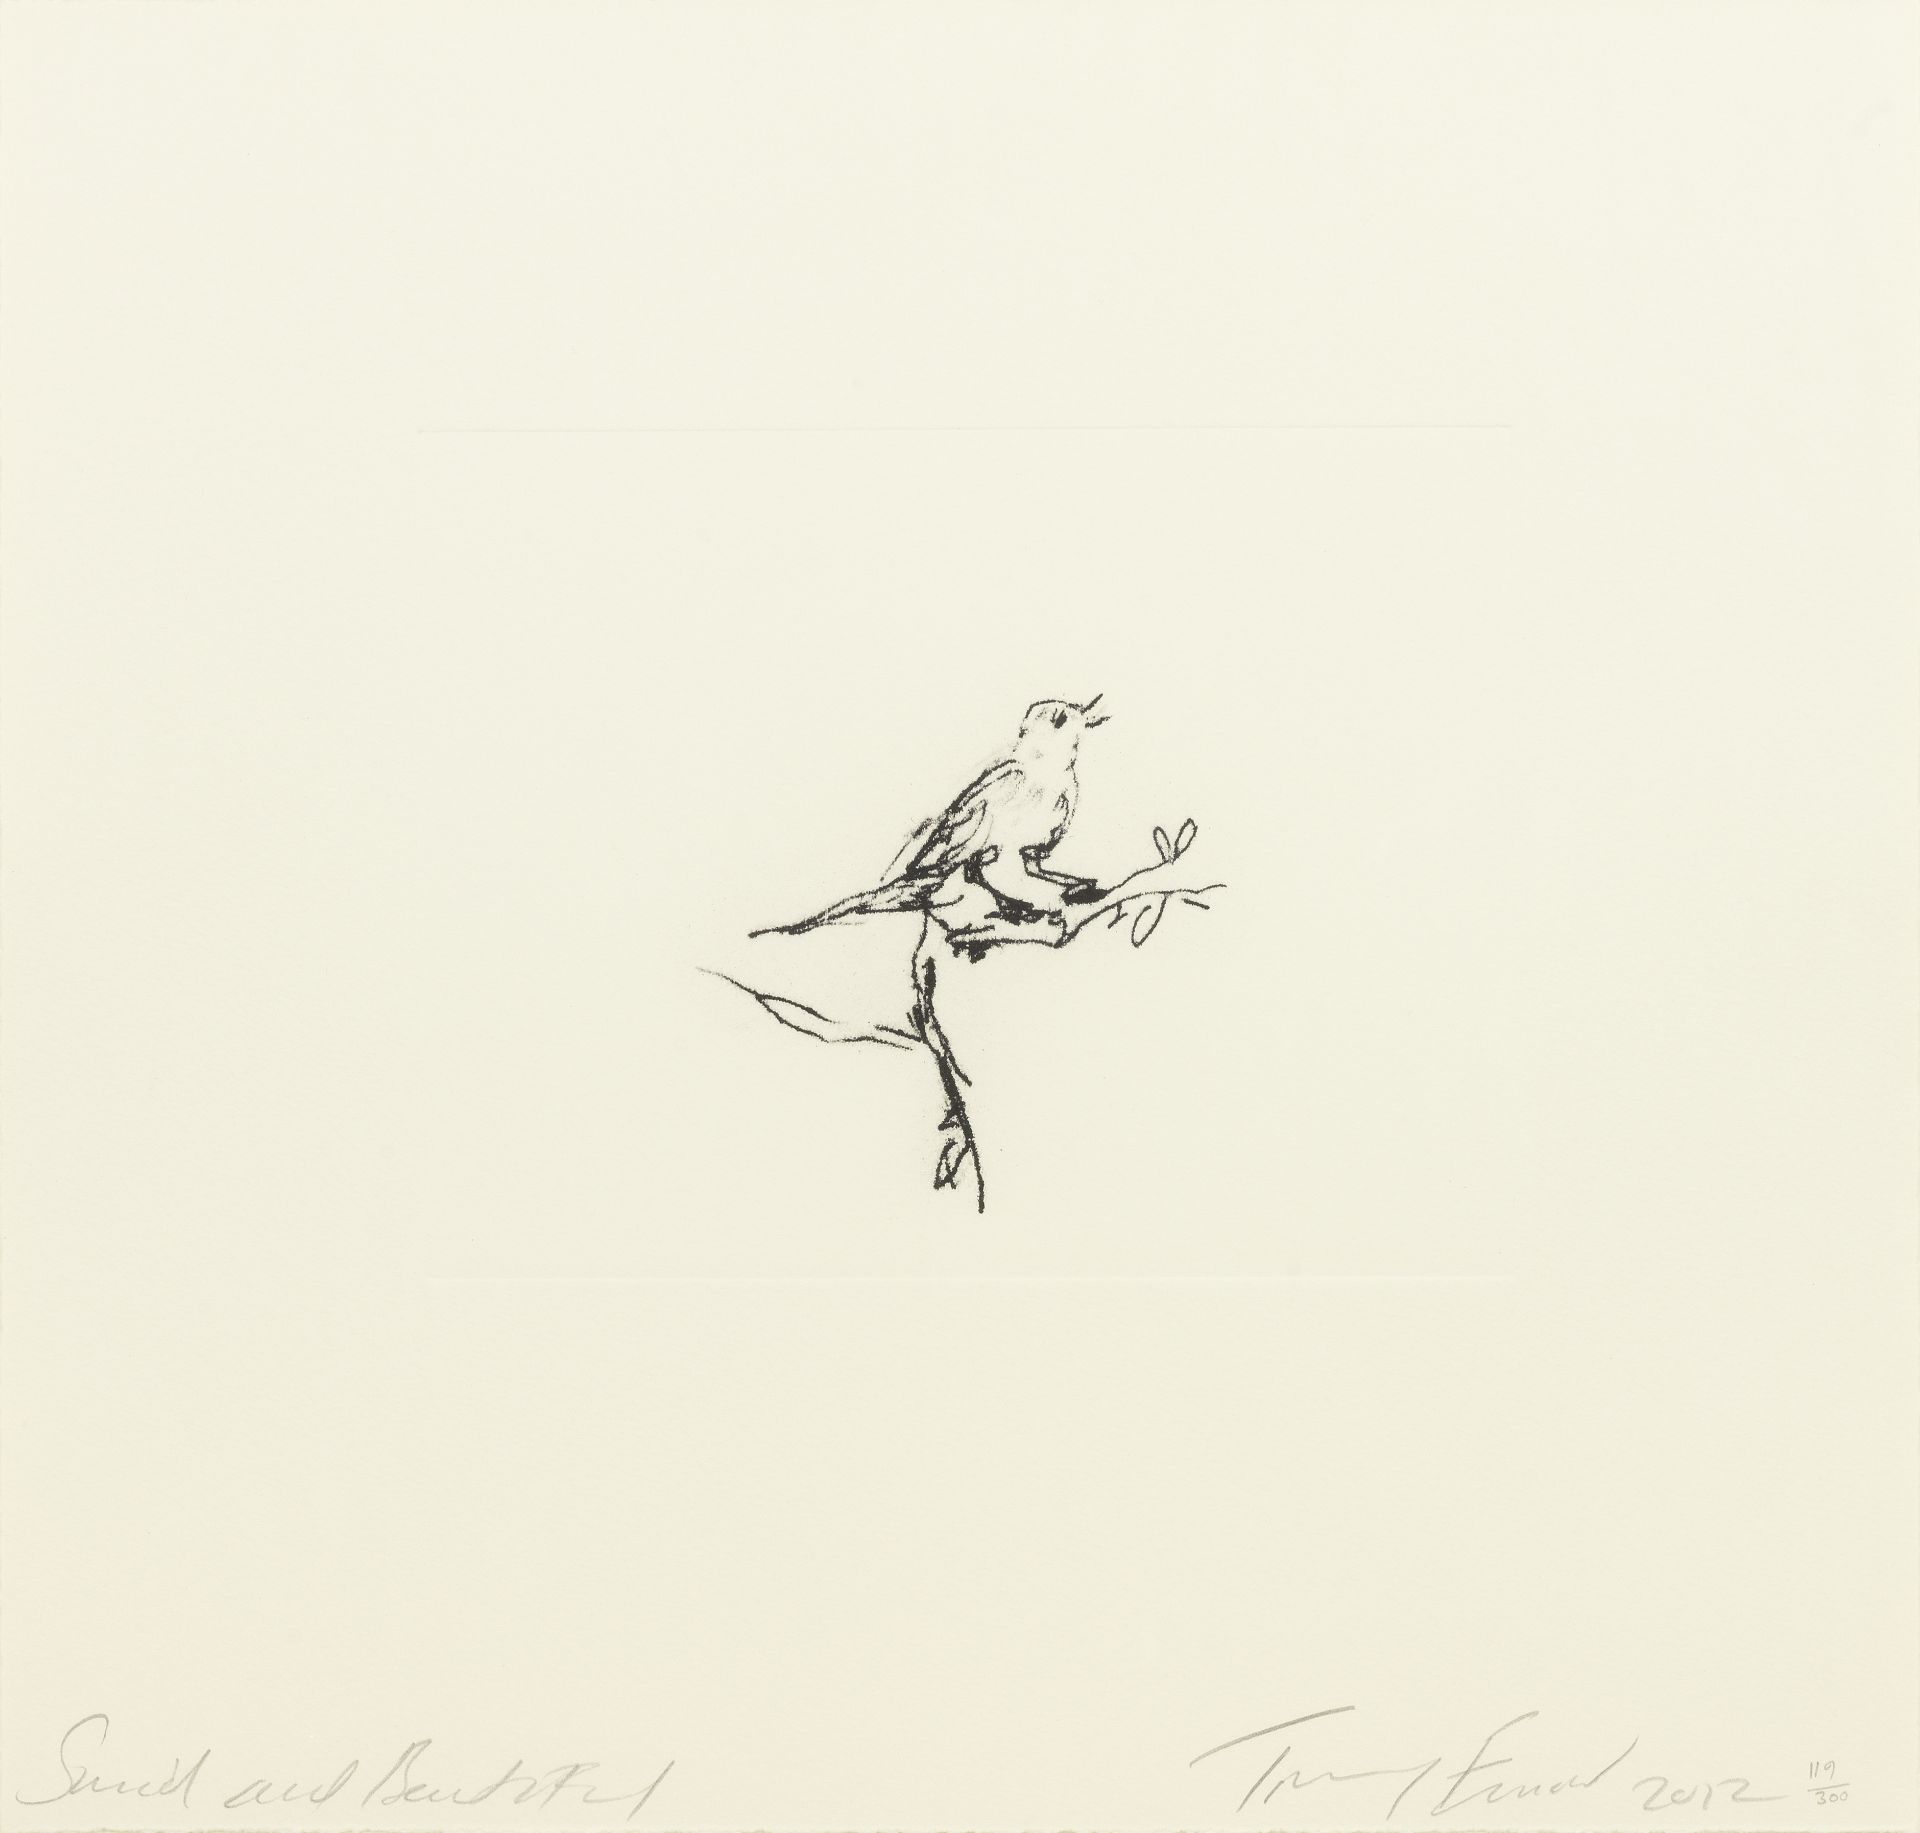 Tracey Emin (British, born 1963) Small and Beautiful Polymer gravure, 2012, on wove paper, signe...